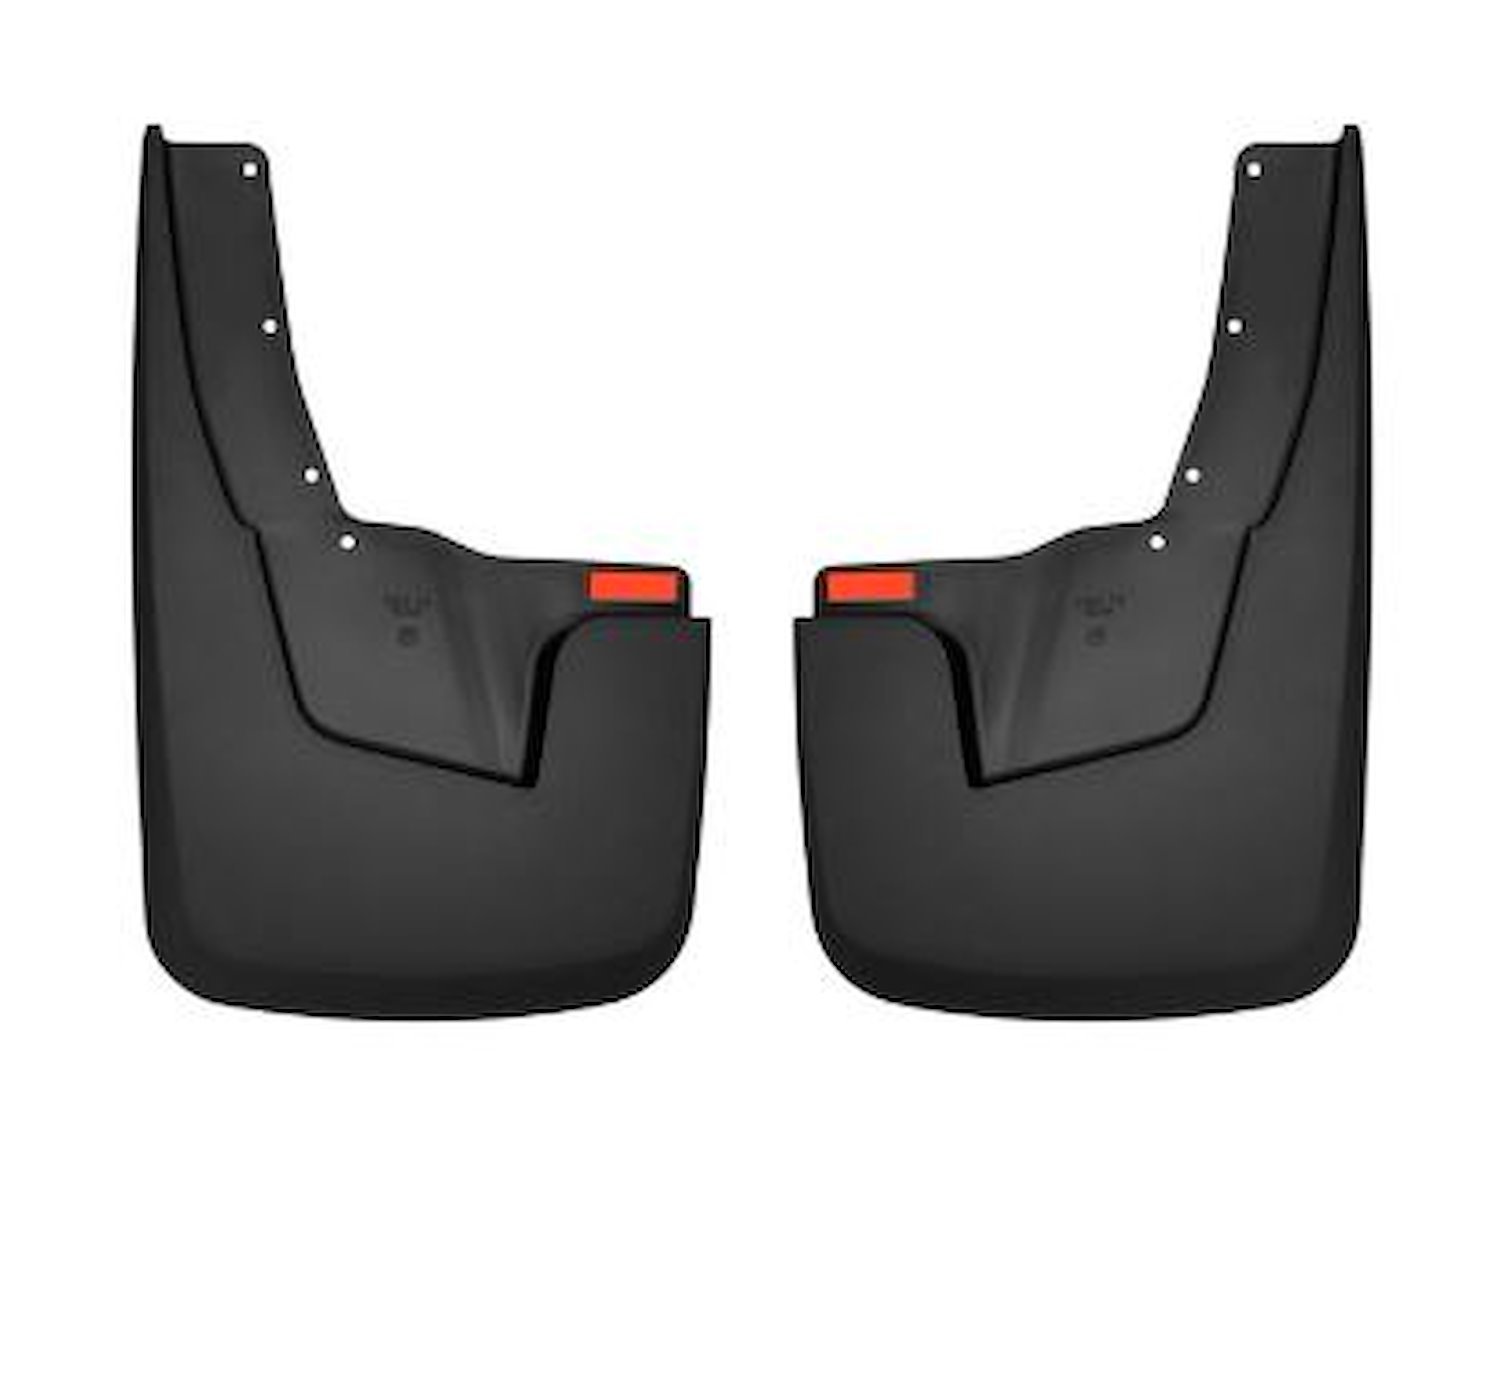 Custom Molded Rear Mud Guards for 2019 Dodge Ram 1500 with OEM Fender Flares